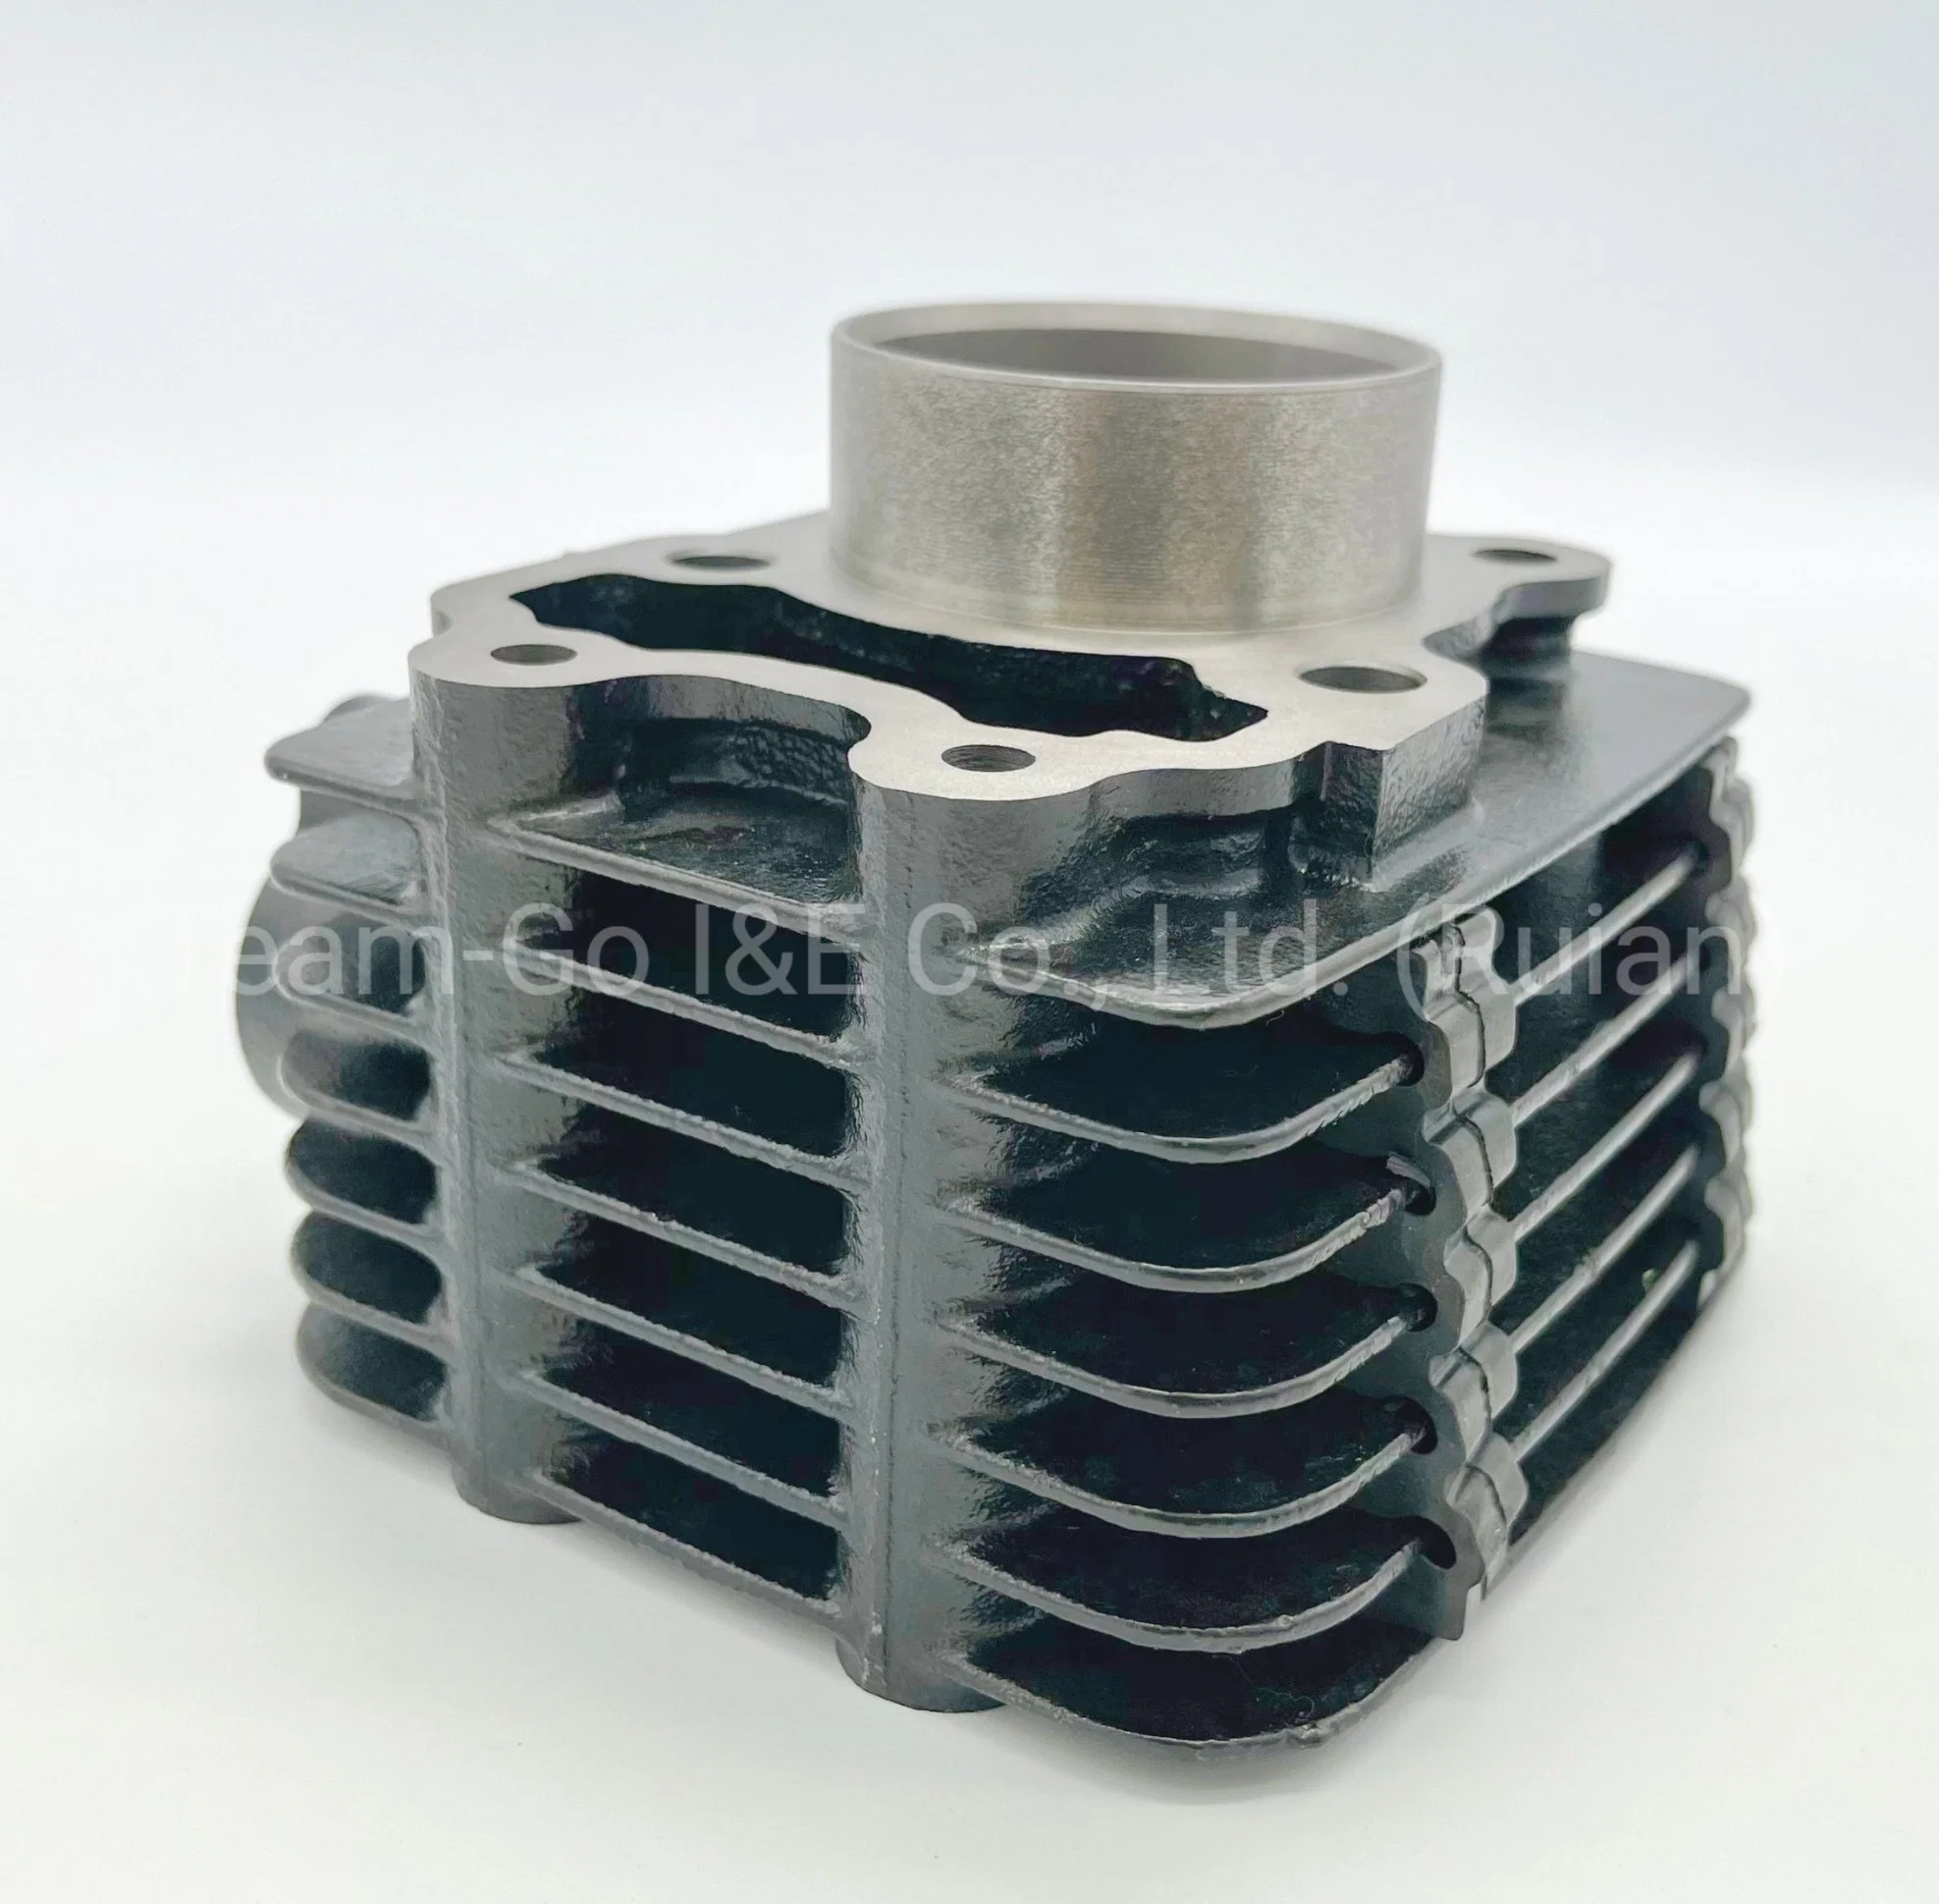 Motorcycle Part Comp. Cylinder for Baj with Competitive Price and Quality